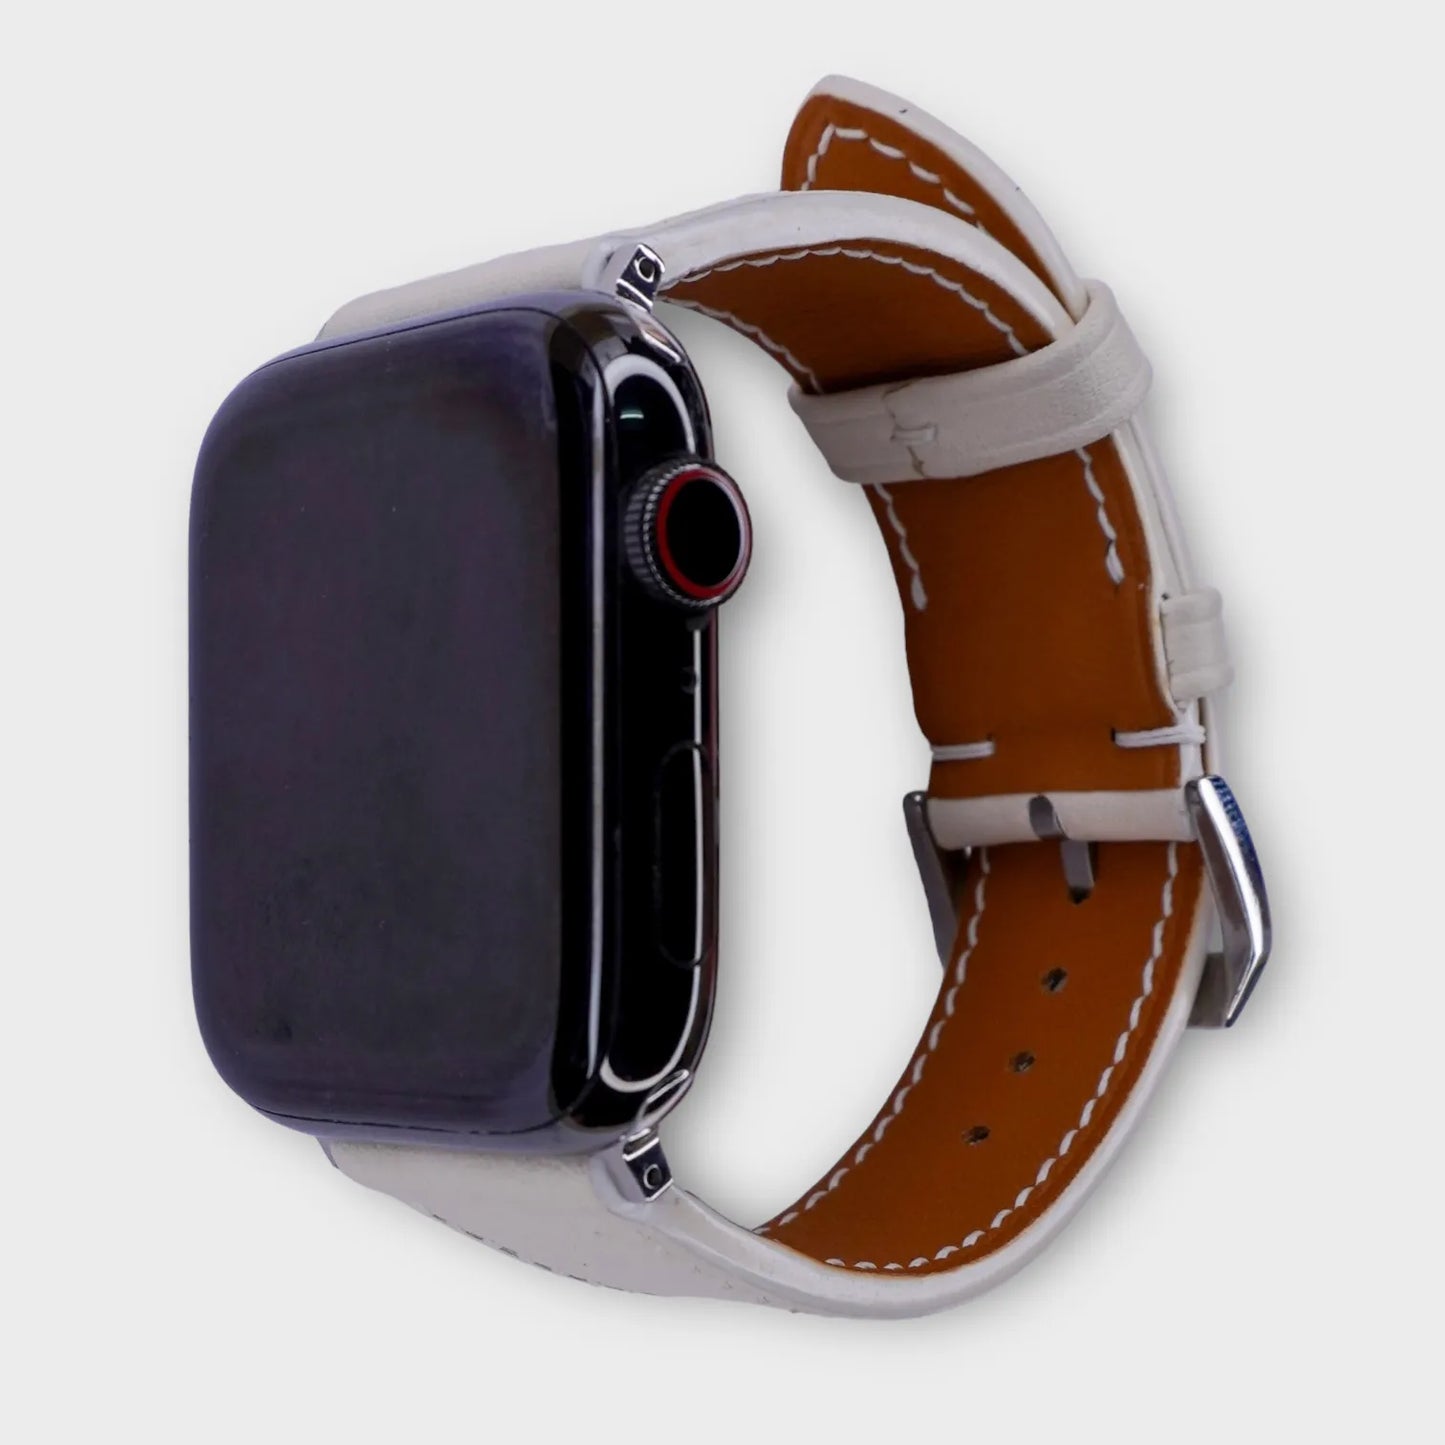 Luxurious leather Apple Watch band crafted from white French Swift leather, exquisitely detailed.